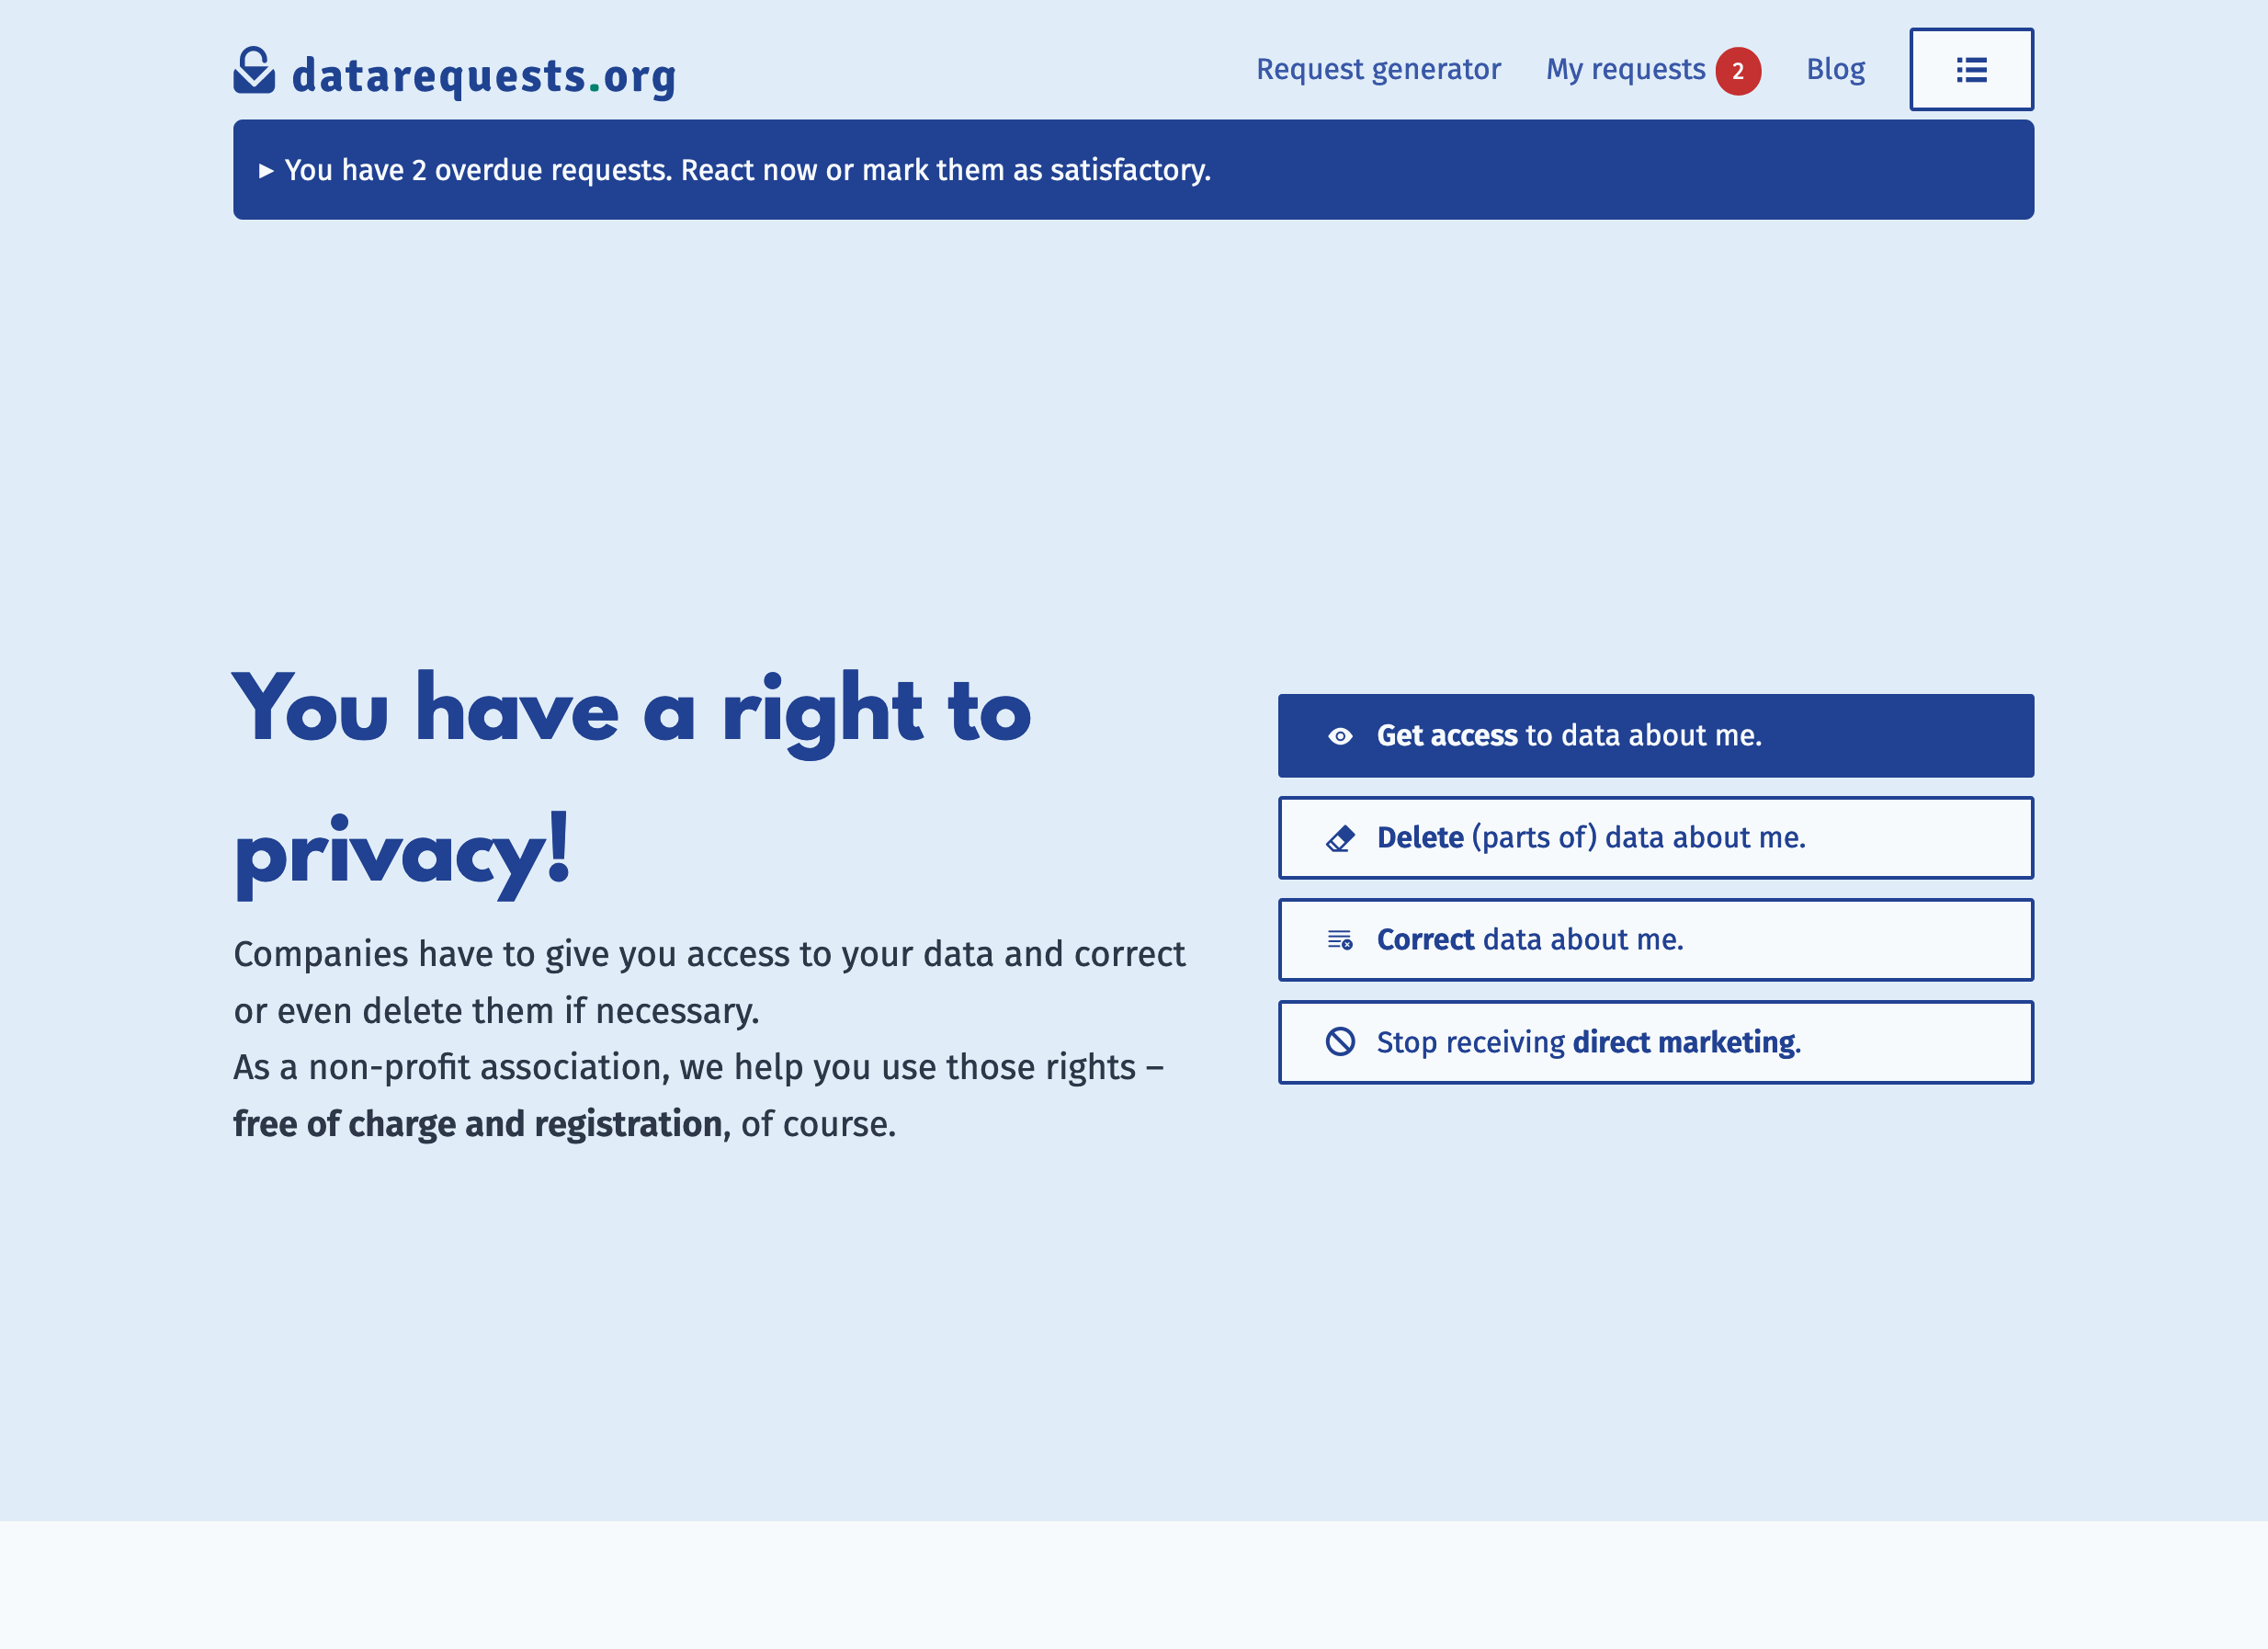 Screenshot of the homepage. It features the top bar with the menu and a badge showing the number of overdue requests (two) and below that a widget saying: “You have 2 overdue requests. React now or mark them as satisfactory.”. Below that is our claim: “You have a right to privacy!” and four buttons for the request types like in the generator.